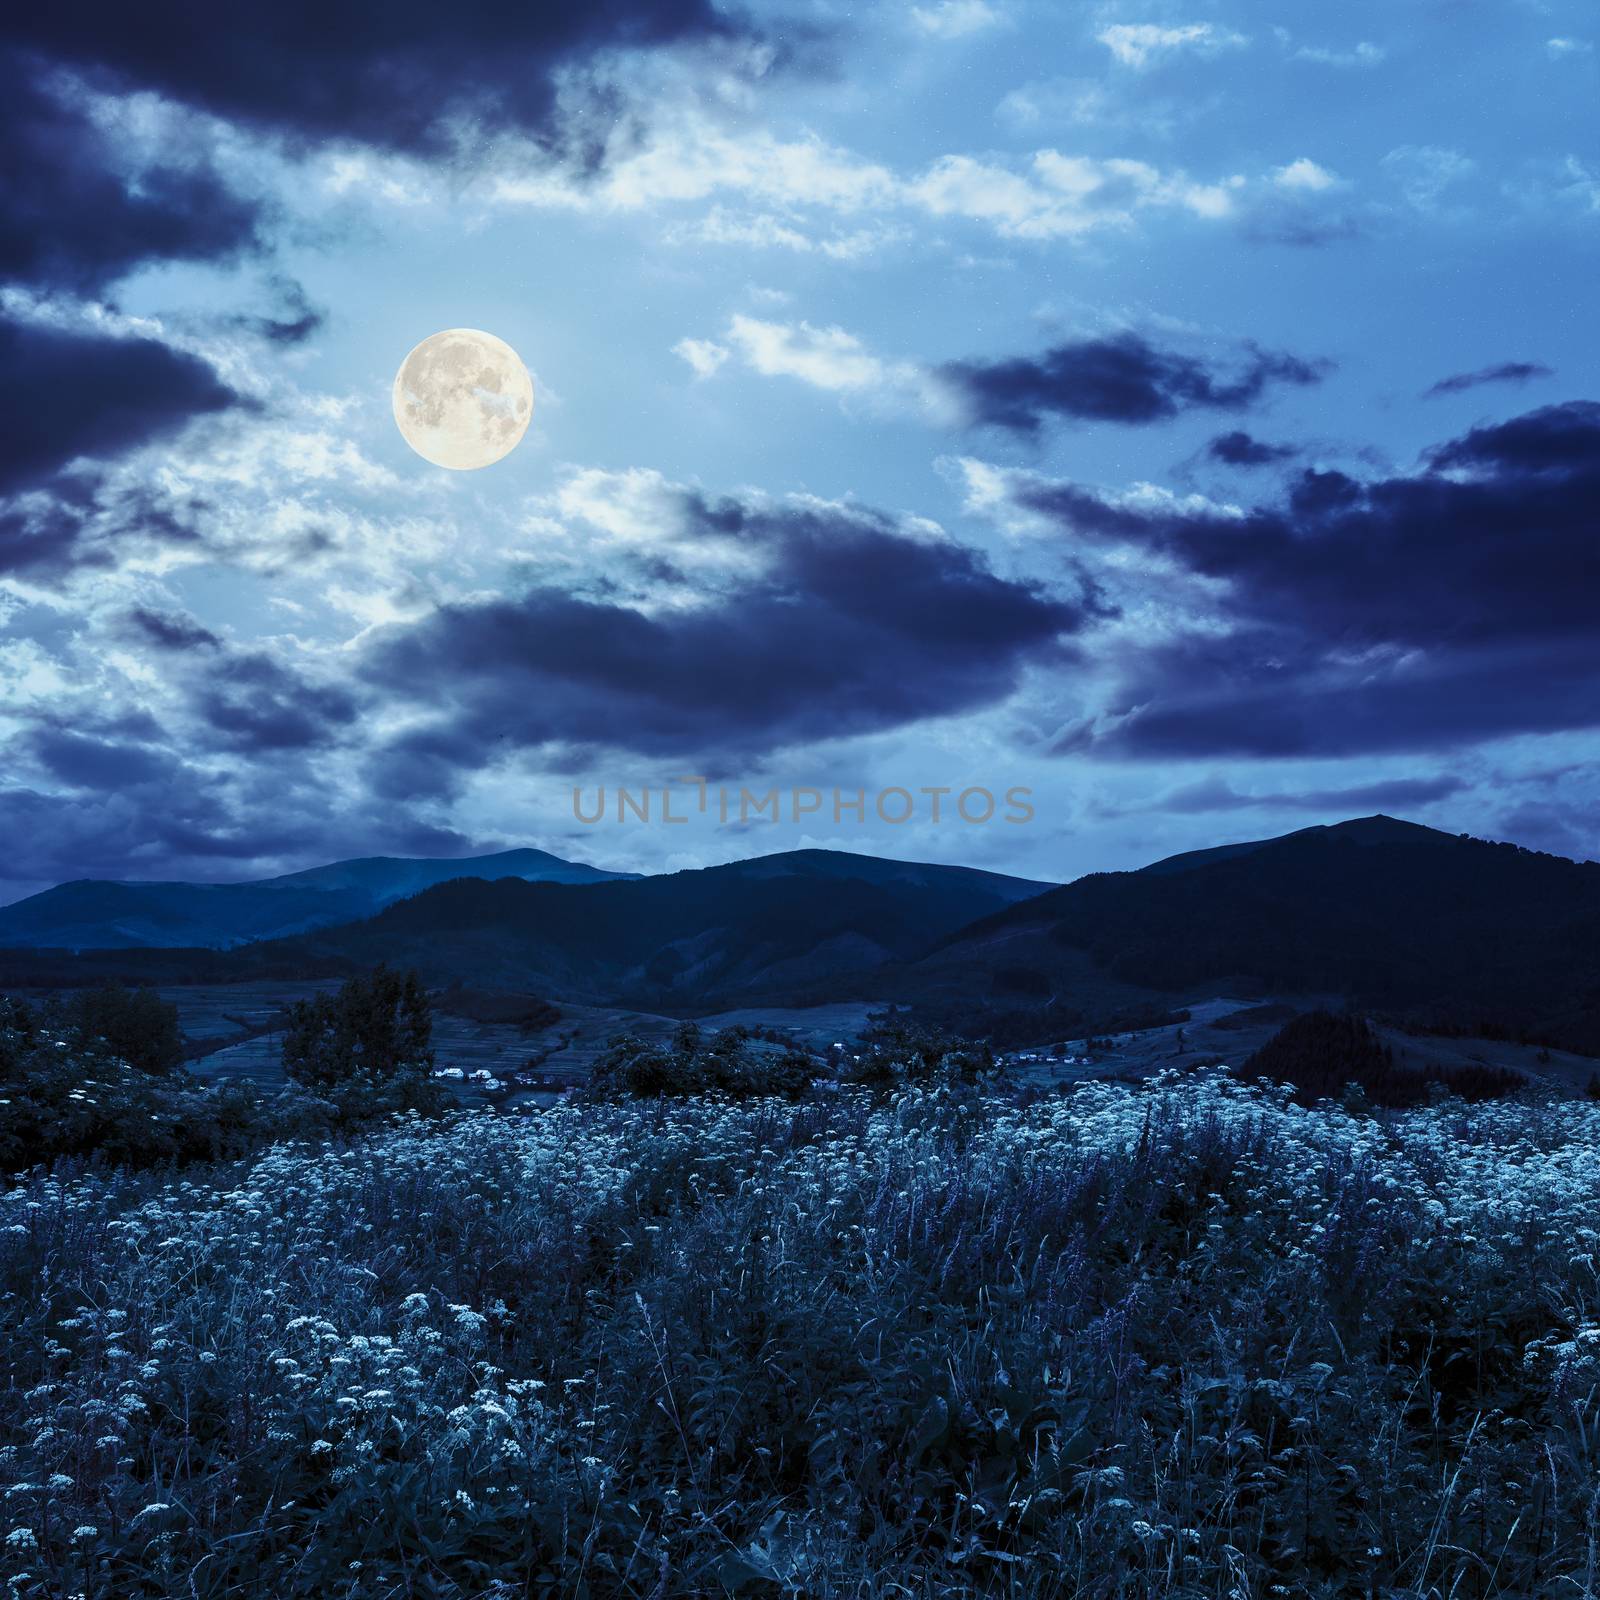 high wild grass and flowers on hillside near the village at mountain foot at night in full moon light